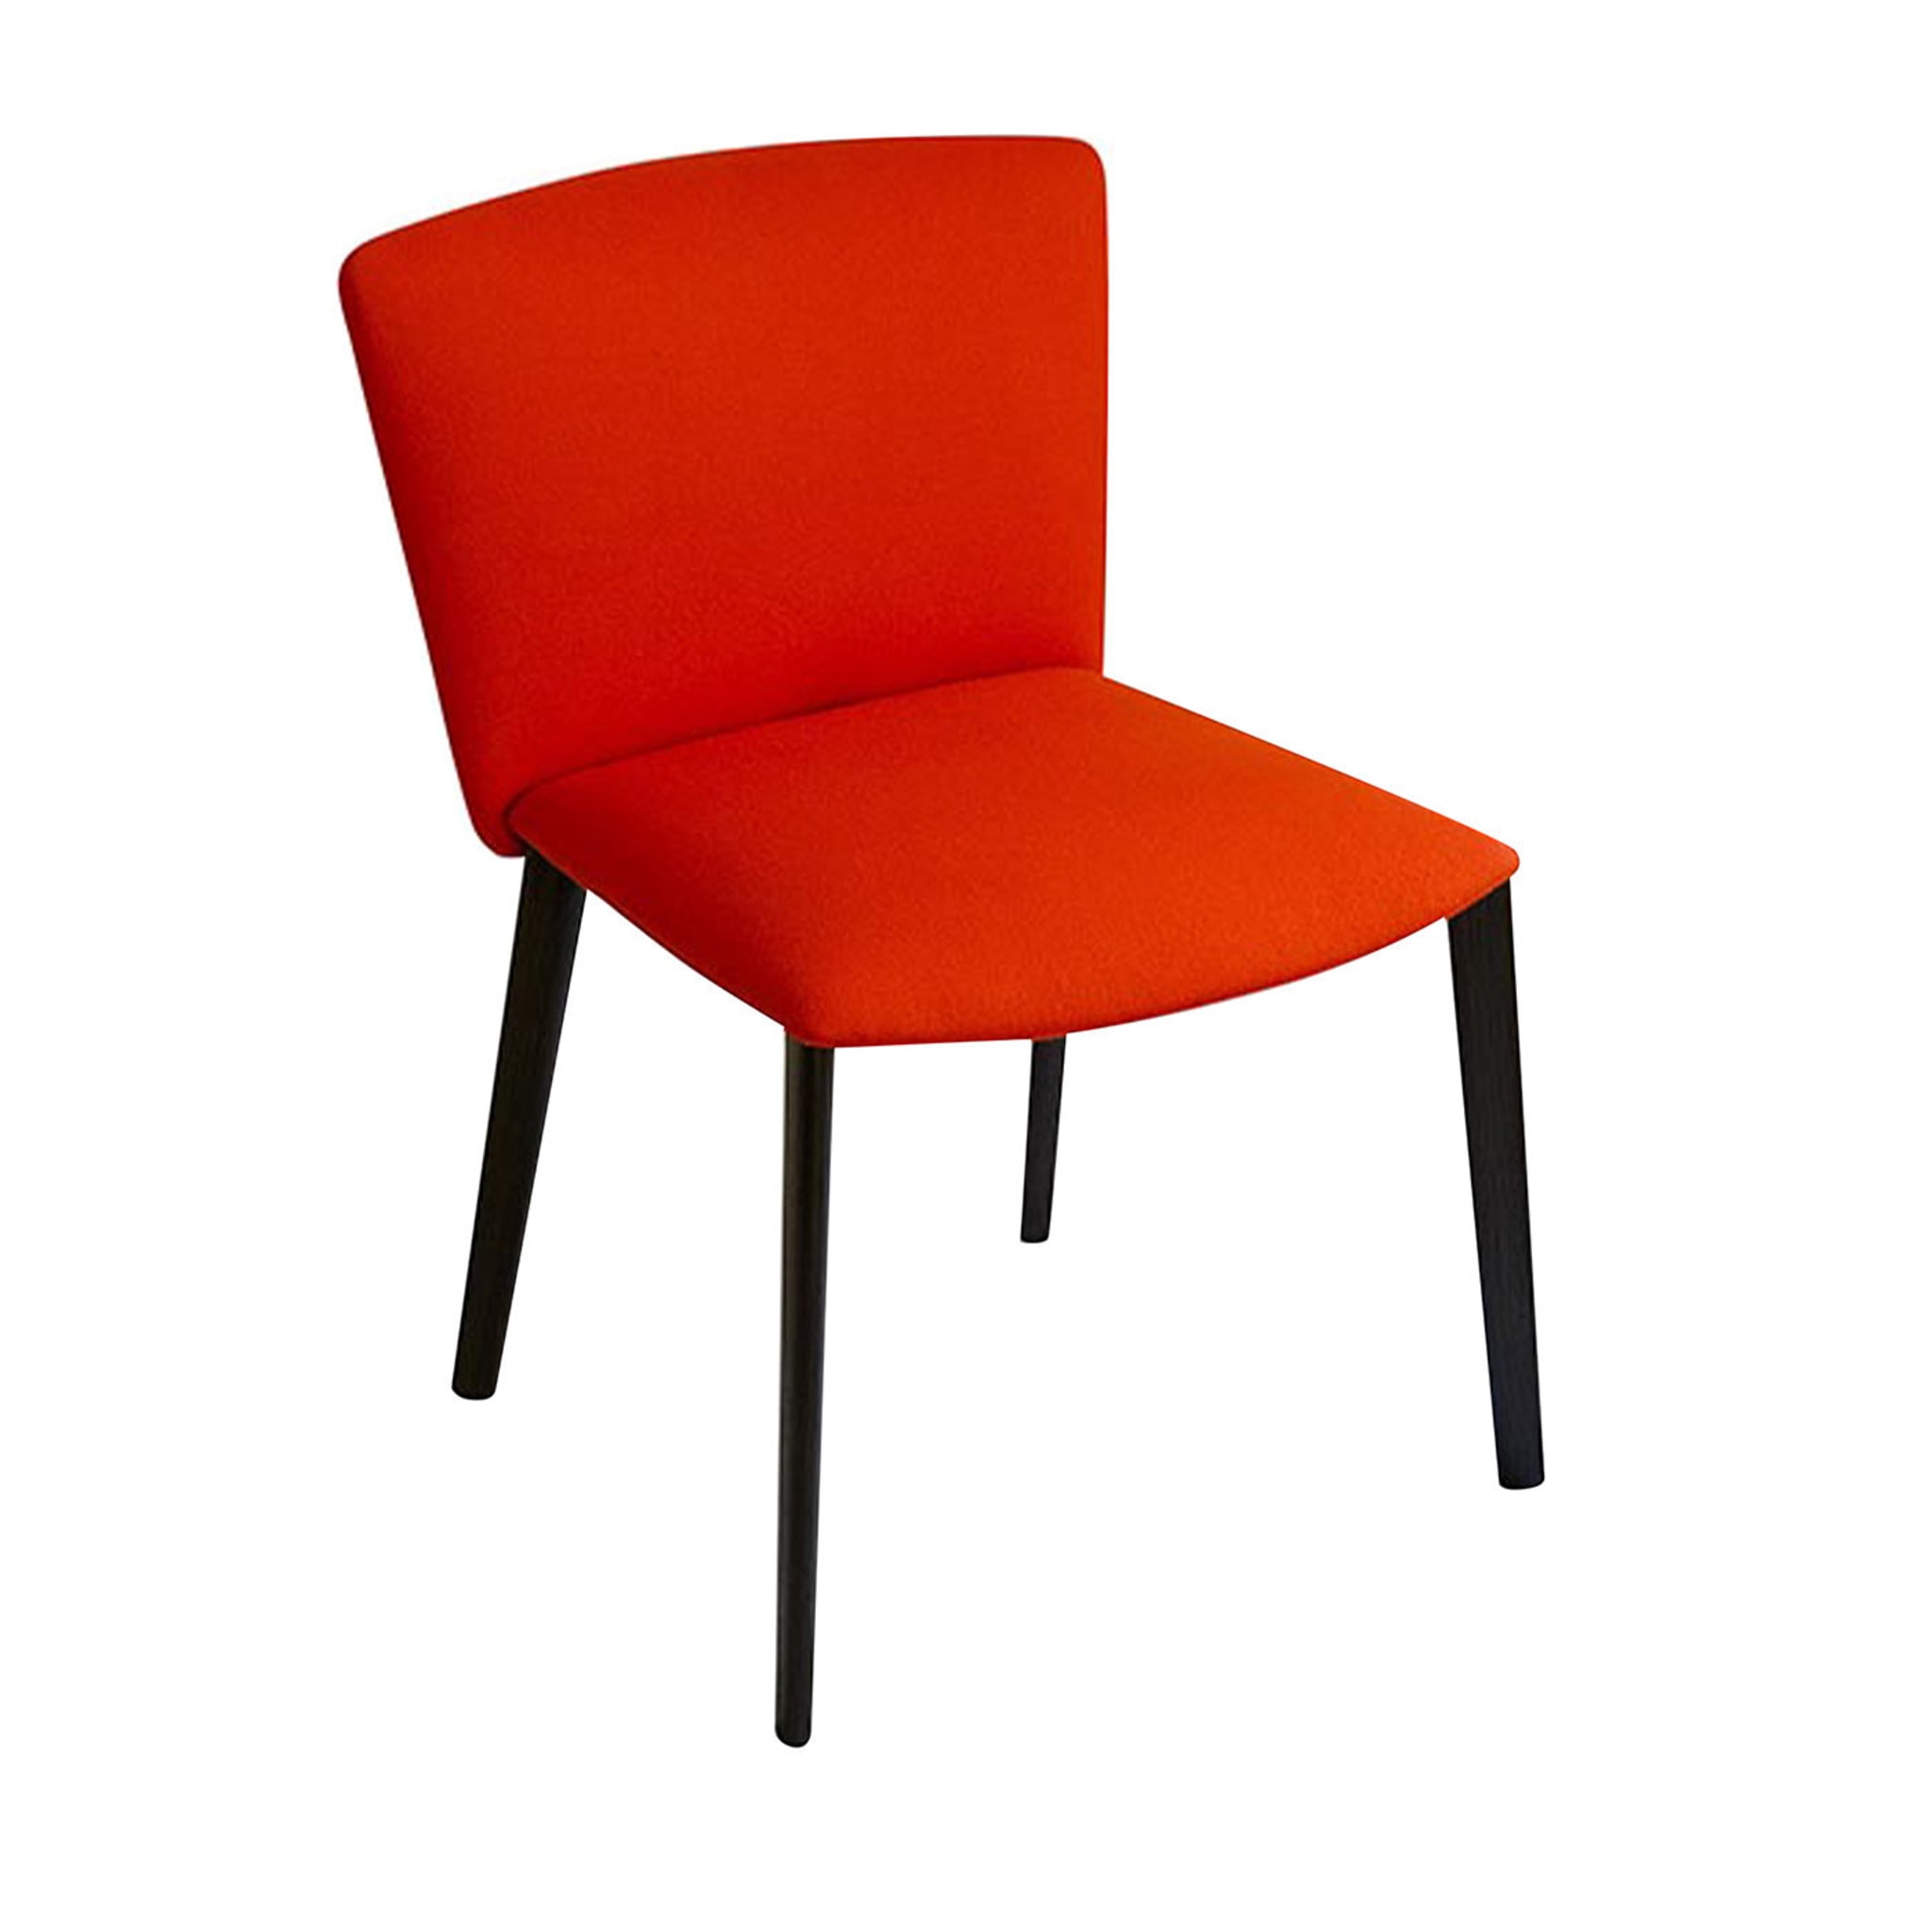 Vela Red Chair by Lievore Altherr Molina - Main view